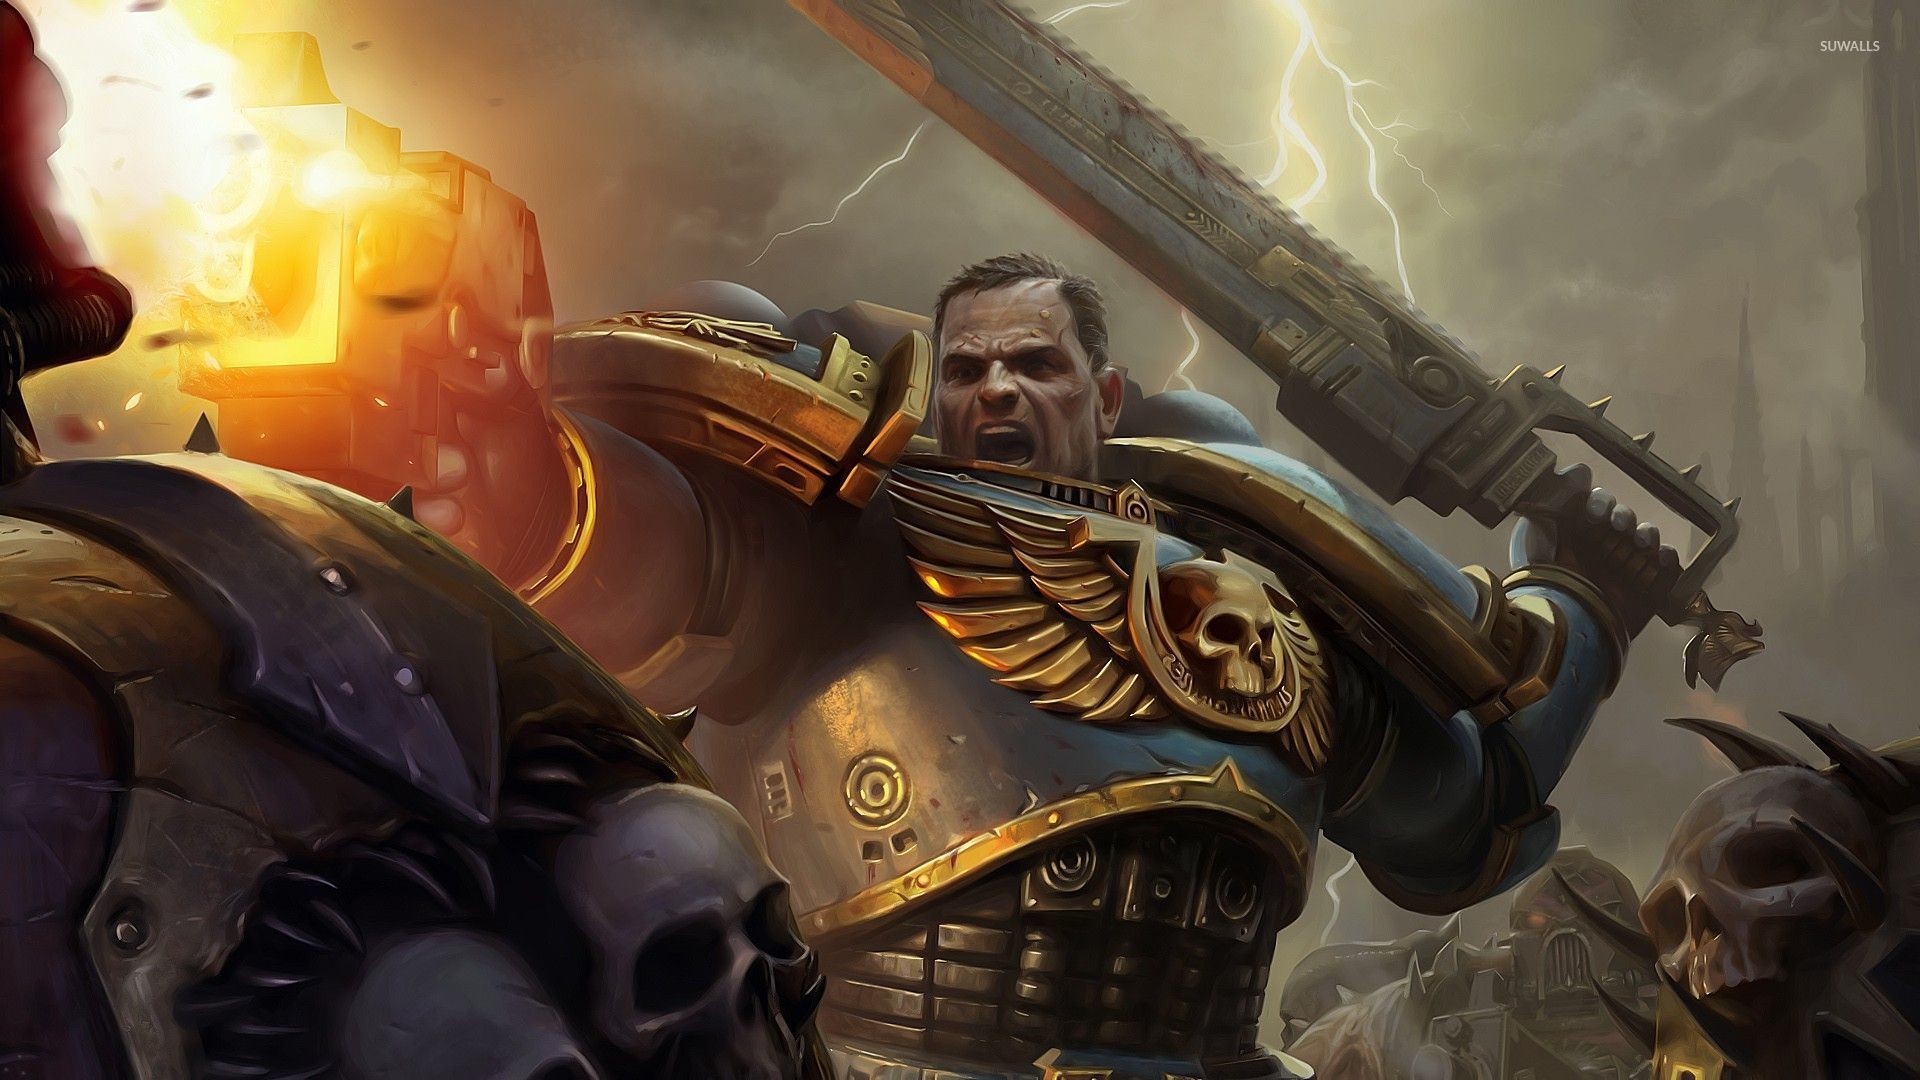 1920x1080 Space Marine Warhammer 40,000 wallpapers (38 Wallpapers)